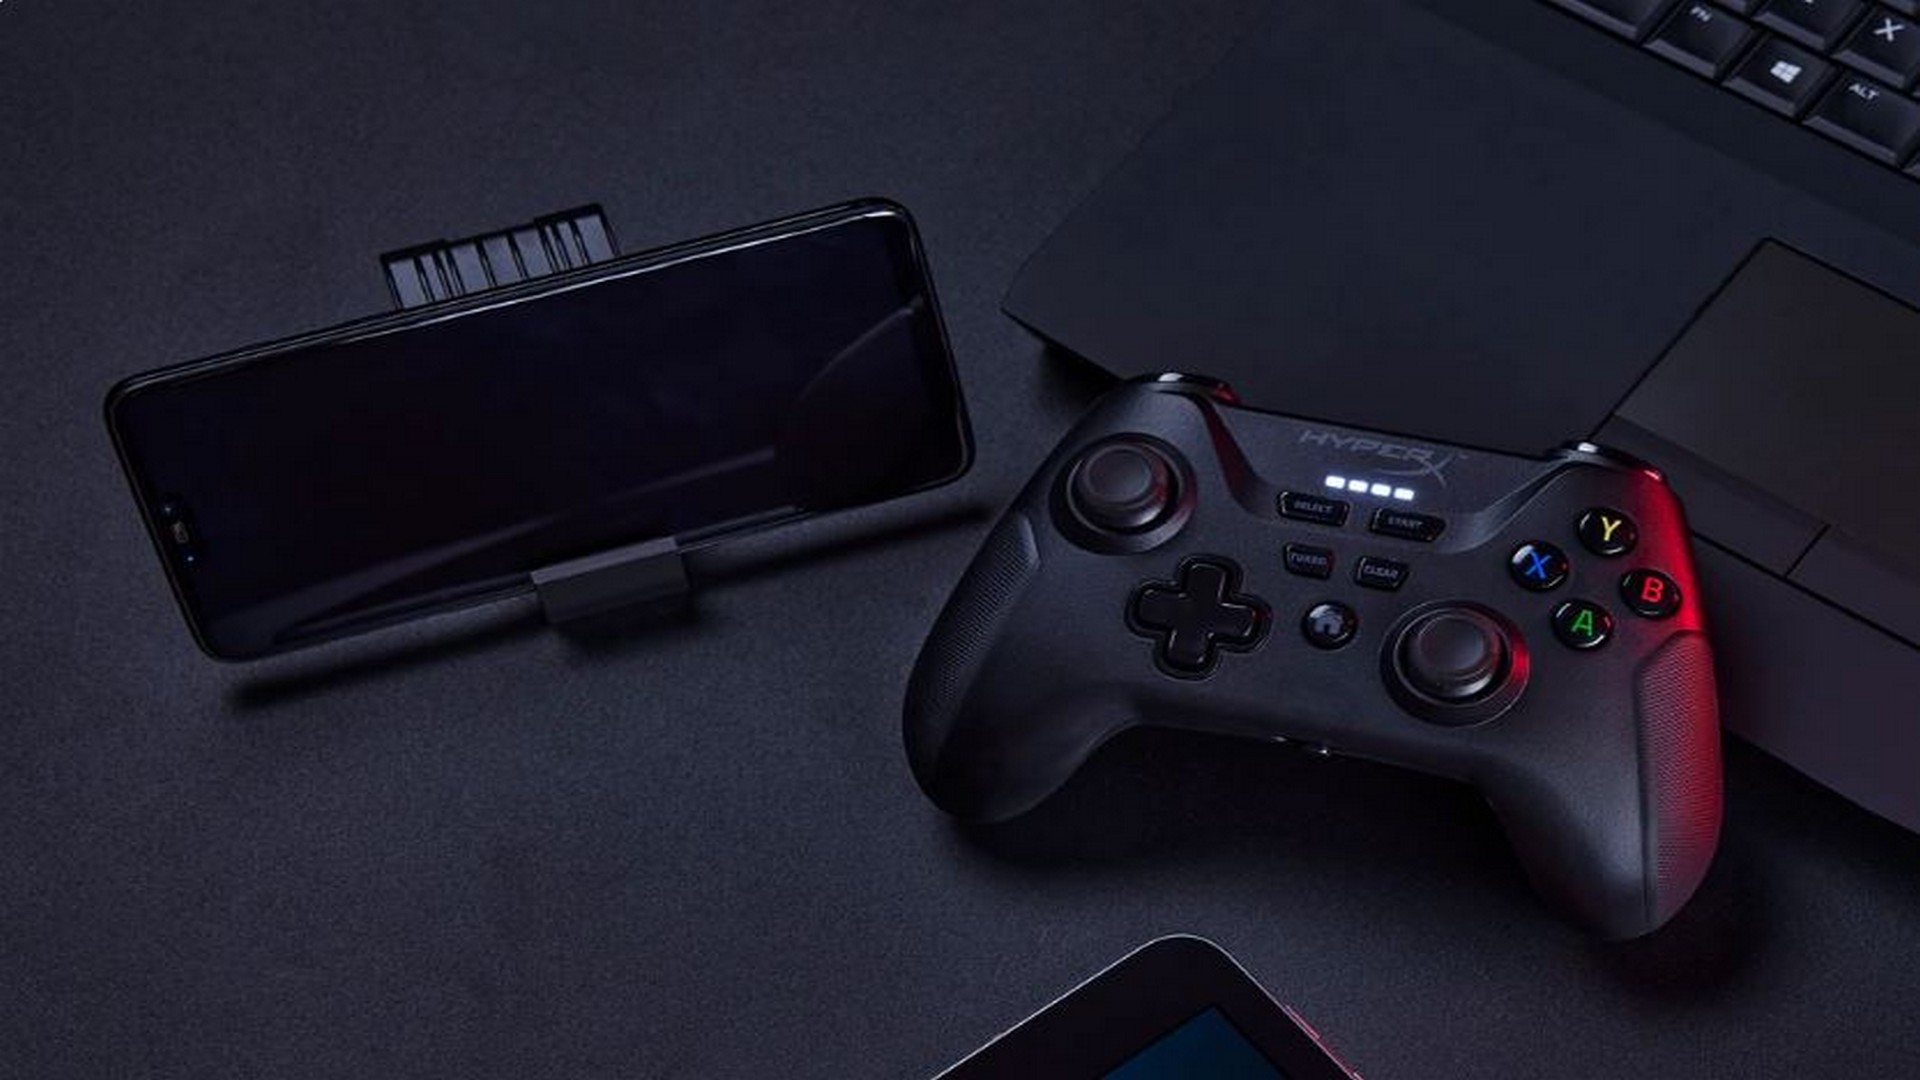 HyperX Clutch Wireless Gaming Controller Now Available For Mobile & PC Gaming